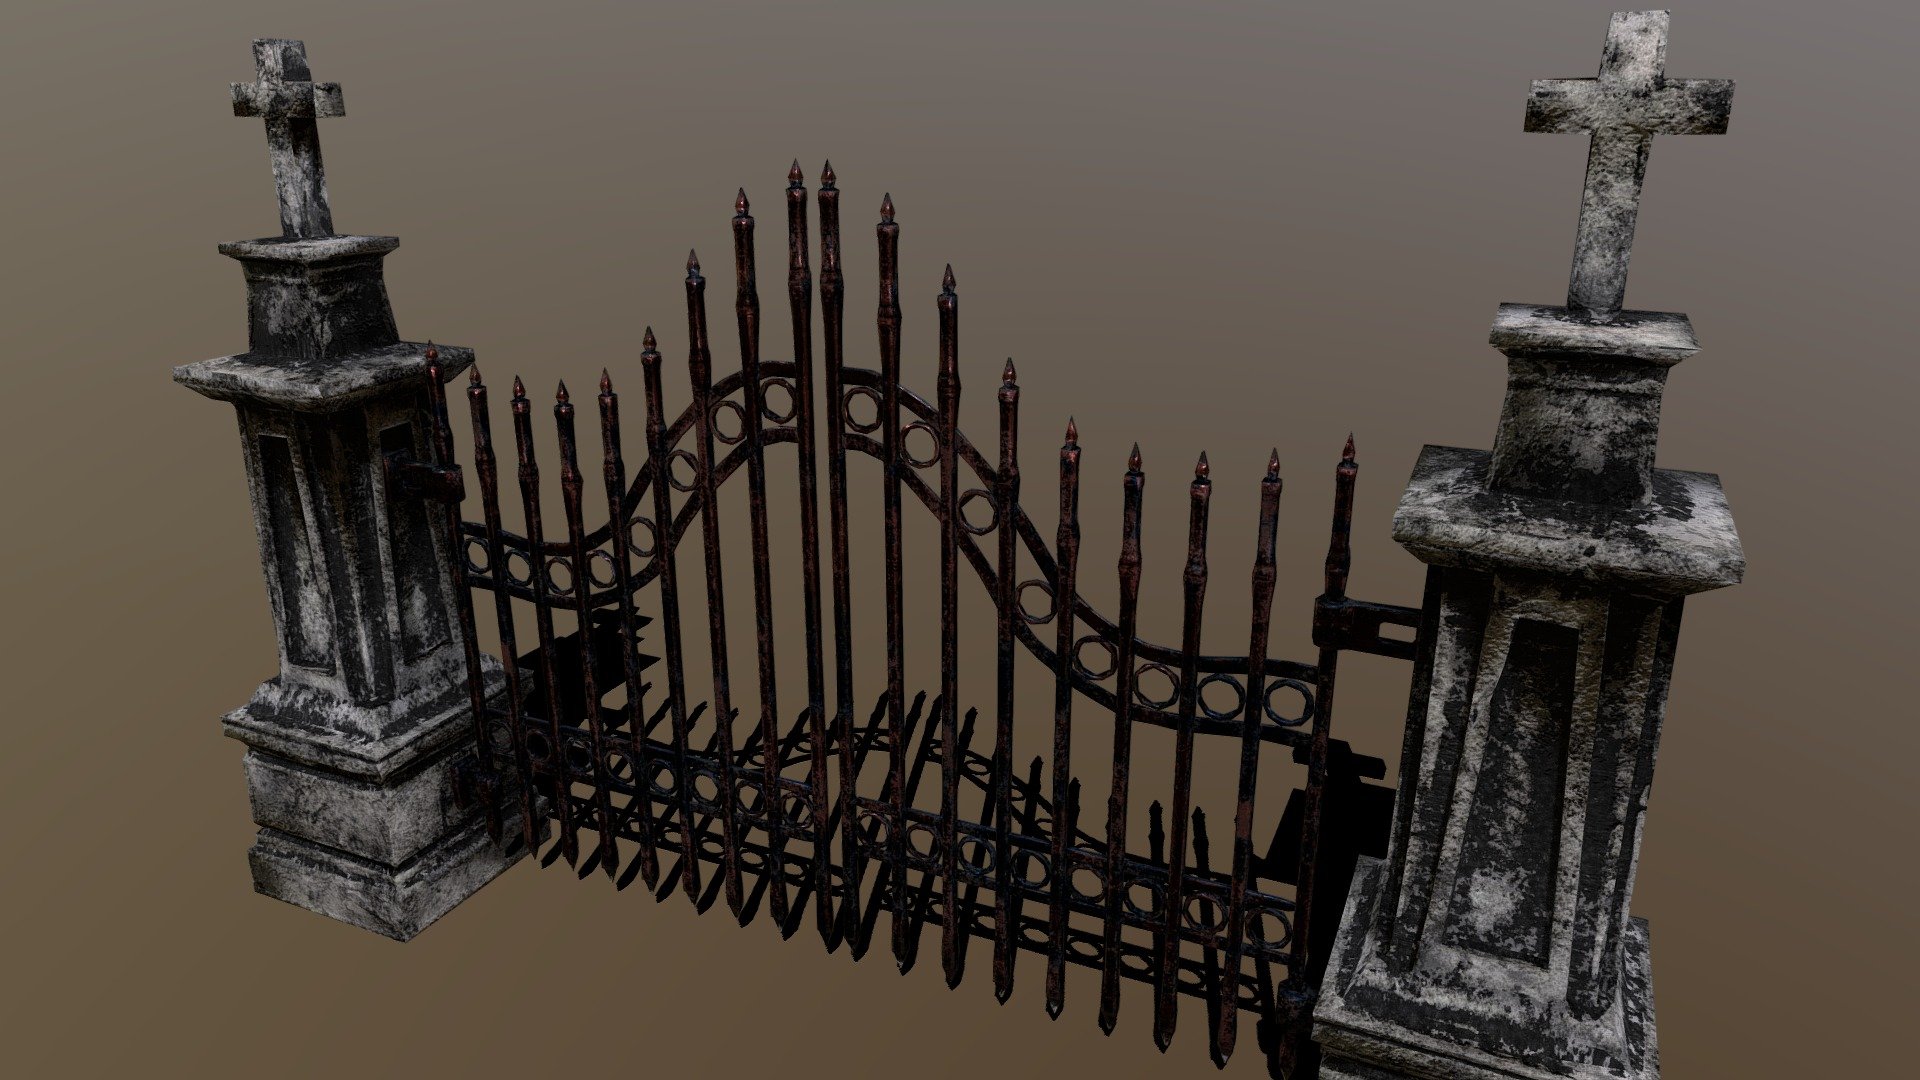 4850 Poly
2k Textures
FBX - Cemetery Gate (Game Ready) - 3D model by Sculpting Tools (@InterFox) 3d model